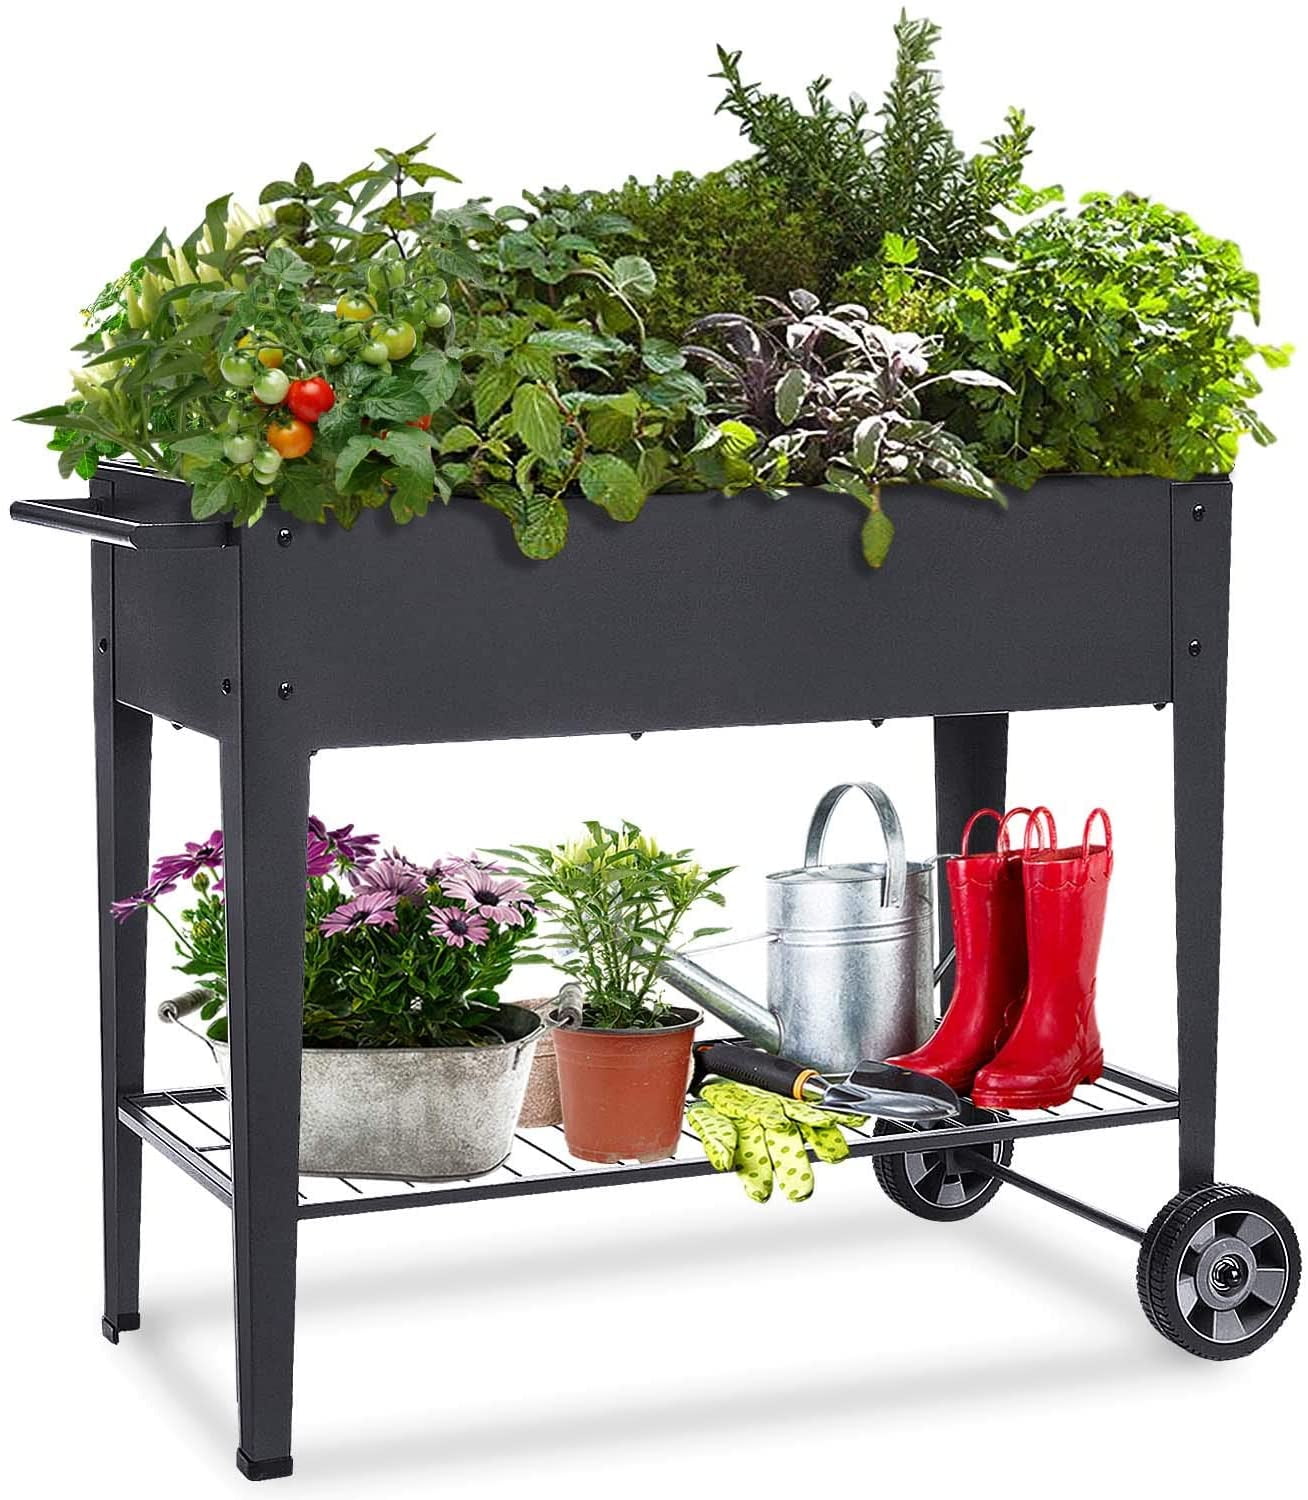 FOYUEE Raised Planter Box with Legs Outdoor Elevated ...